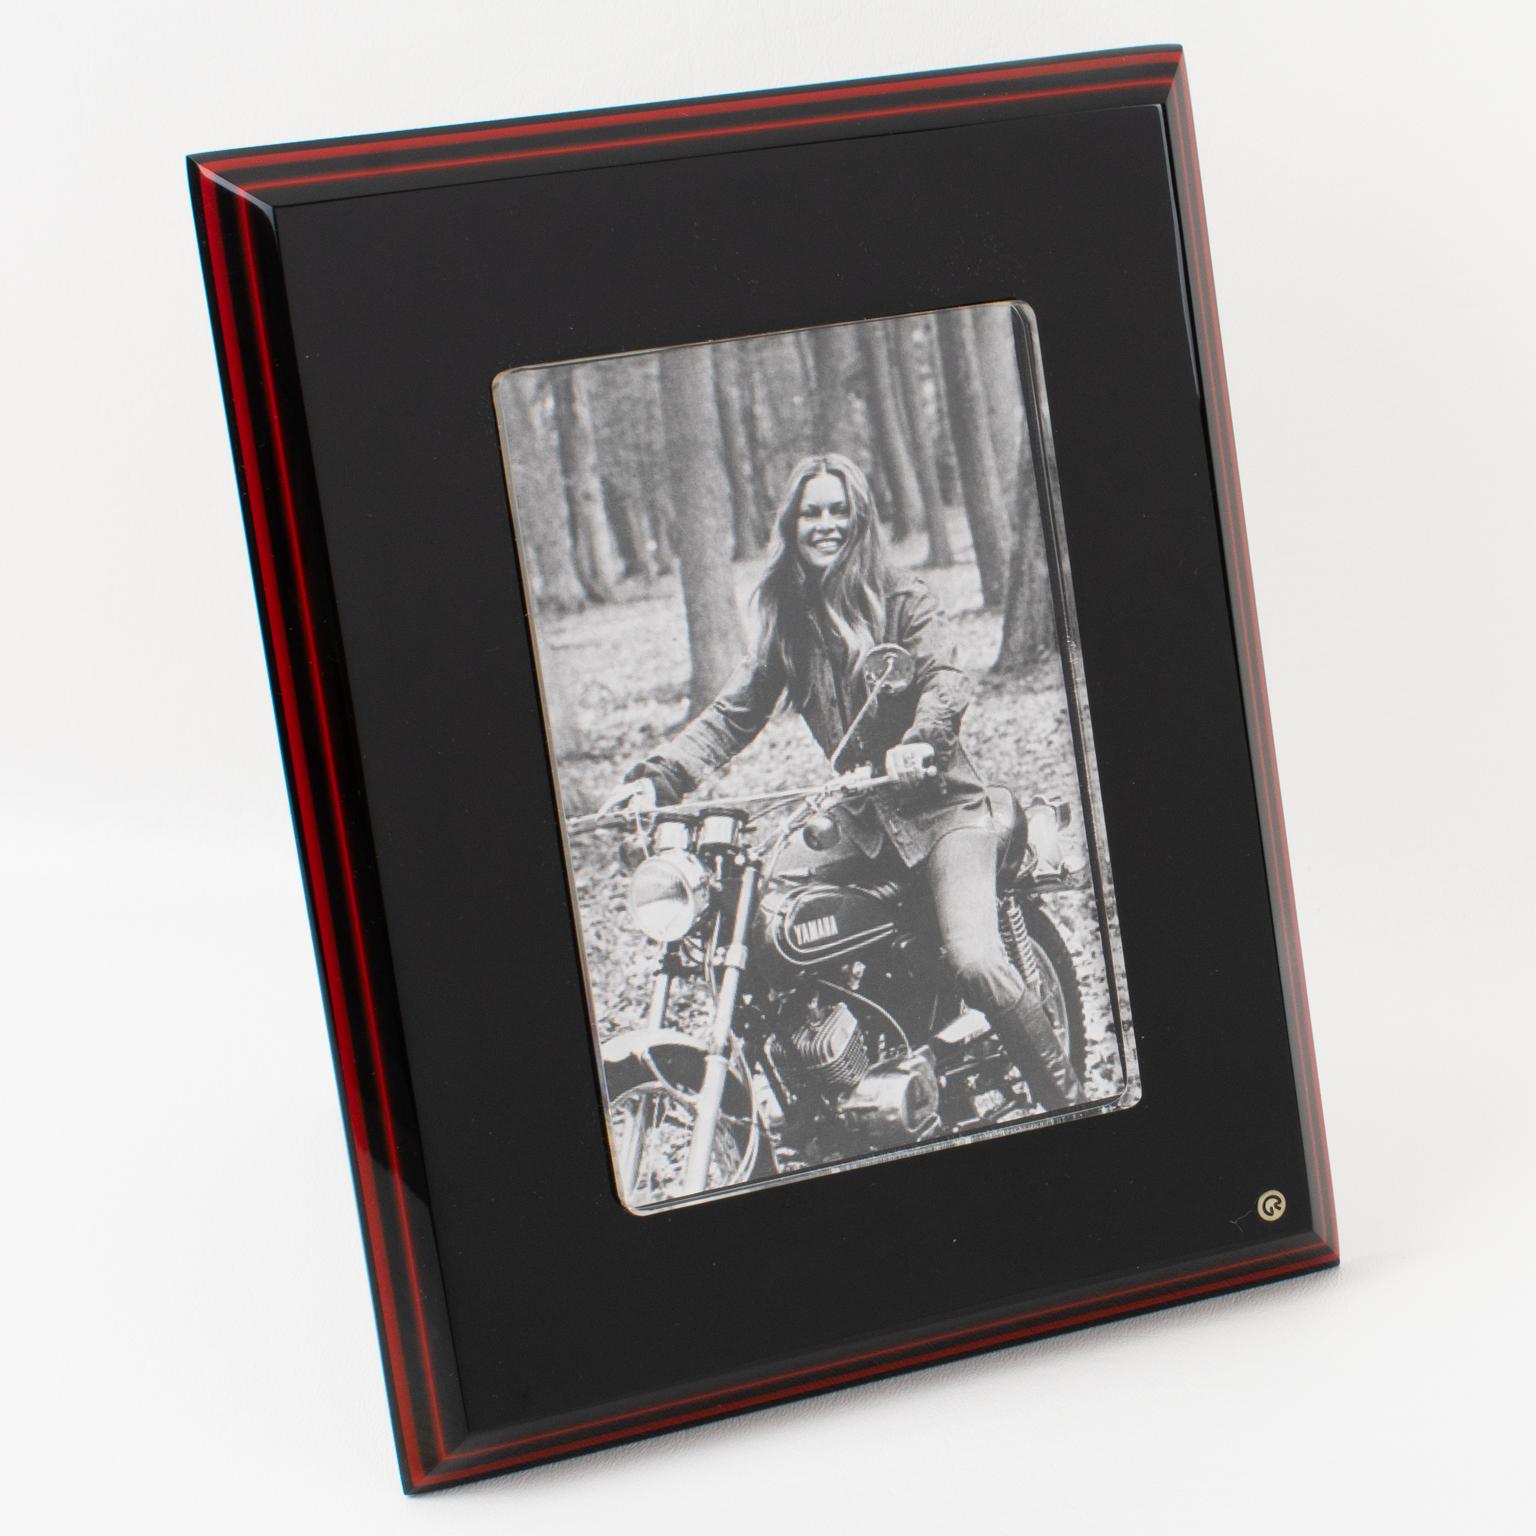 Rede Guzzini, Italy, for Stilart Verona, designed this lovely modernist picture photo frame in the 1970s. It features a black and red multi-layer Lucite shape with acrylic glass to protect the photography. The frame has, on the front, the Rede